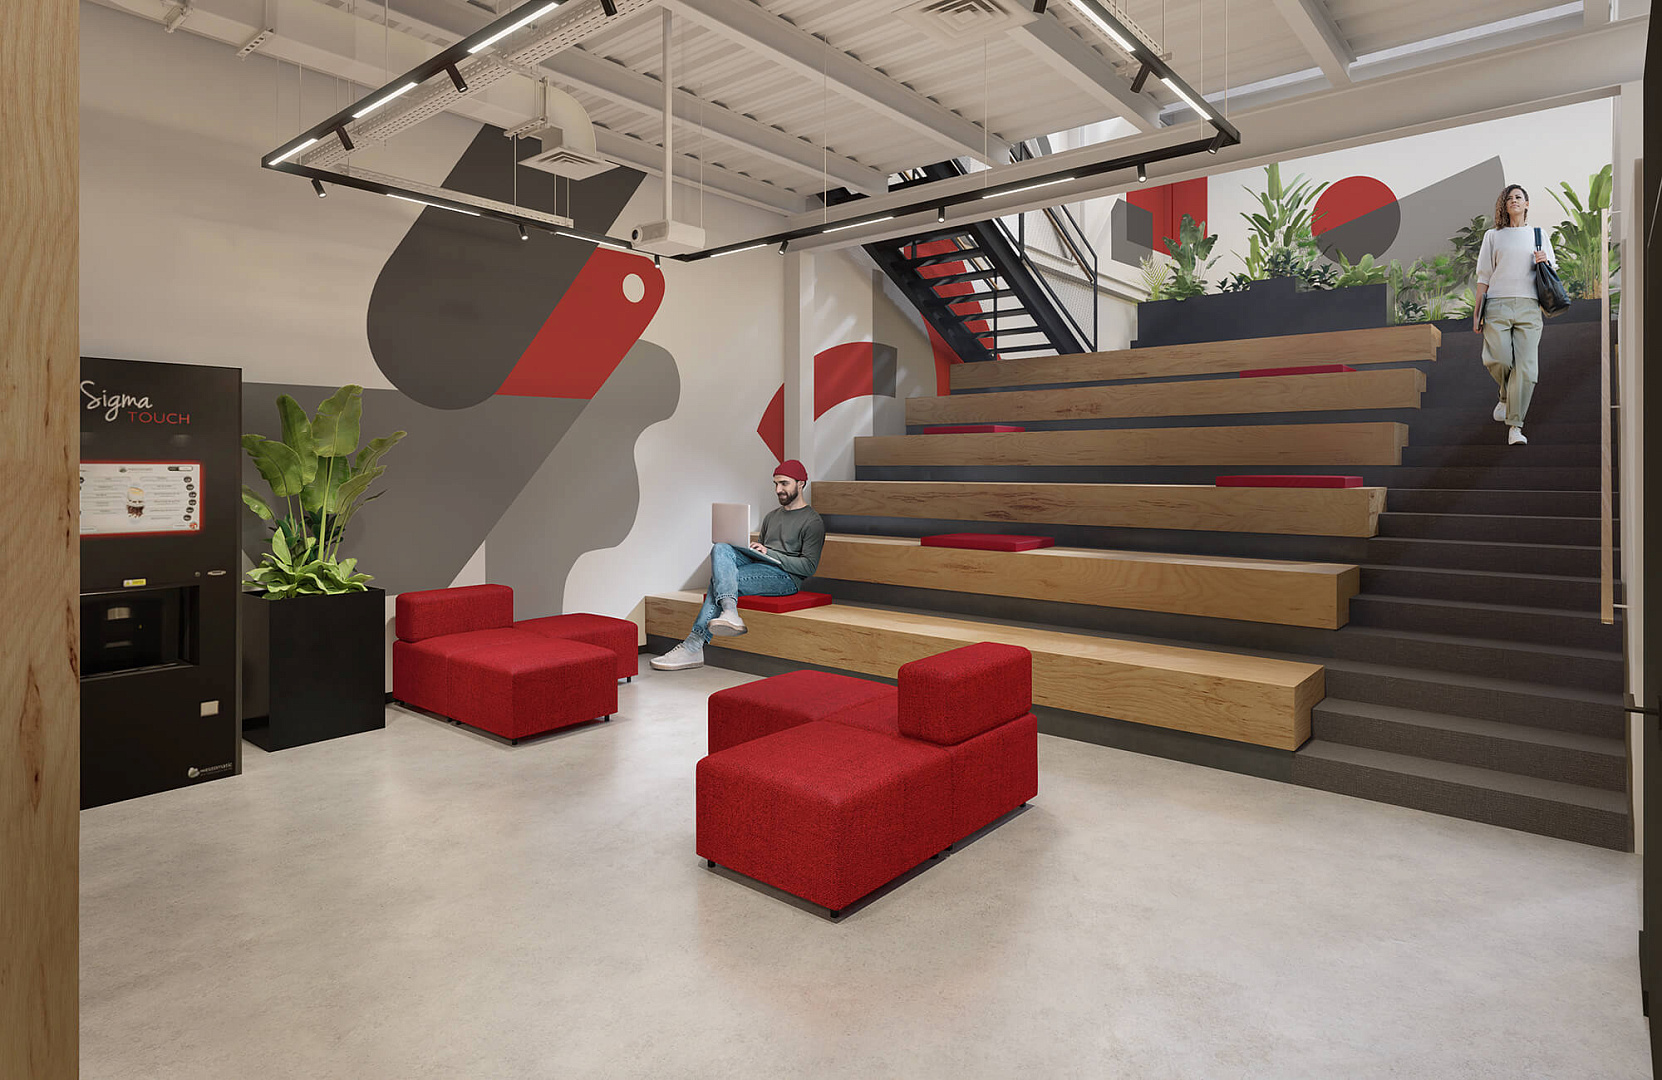 POISK Company Office by PROJECT architectural bureau